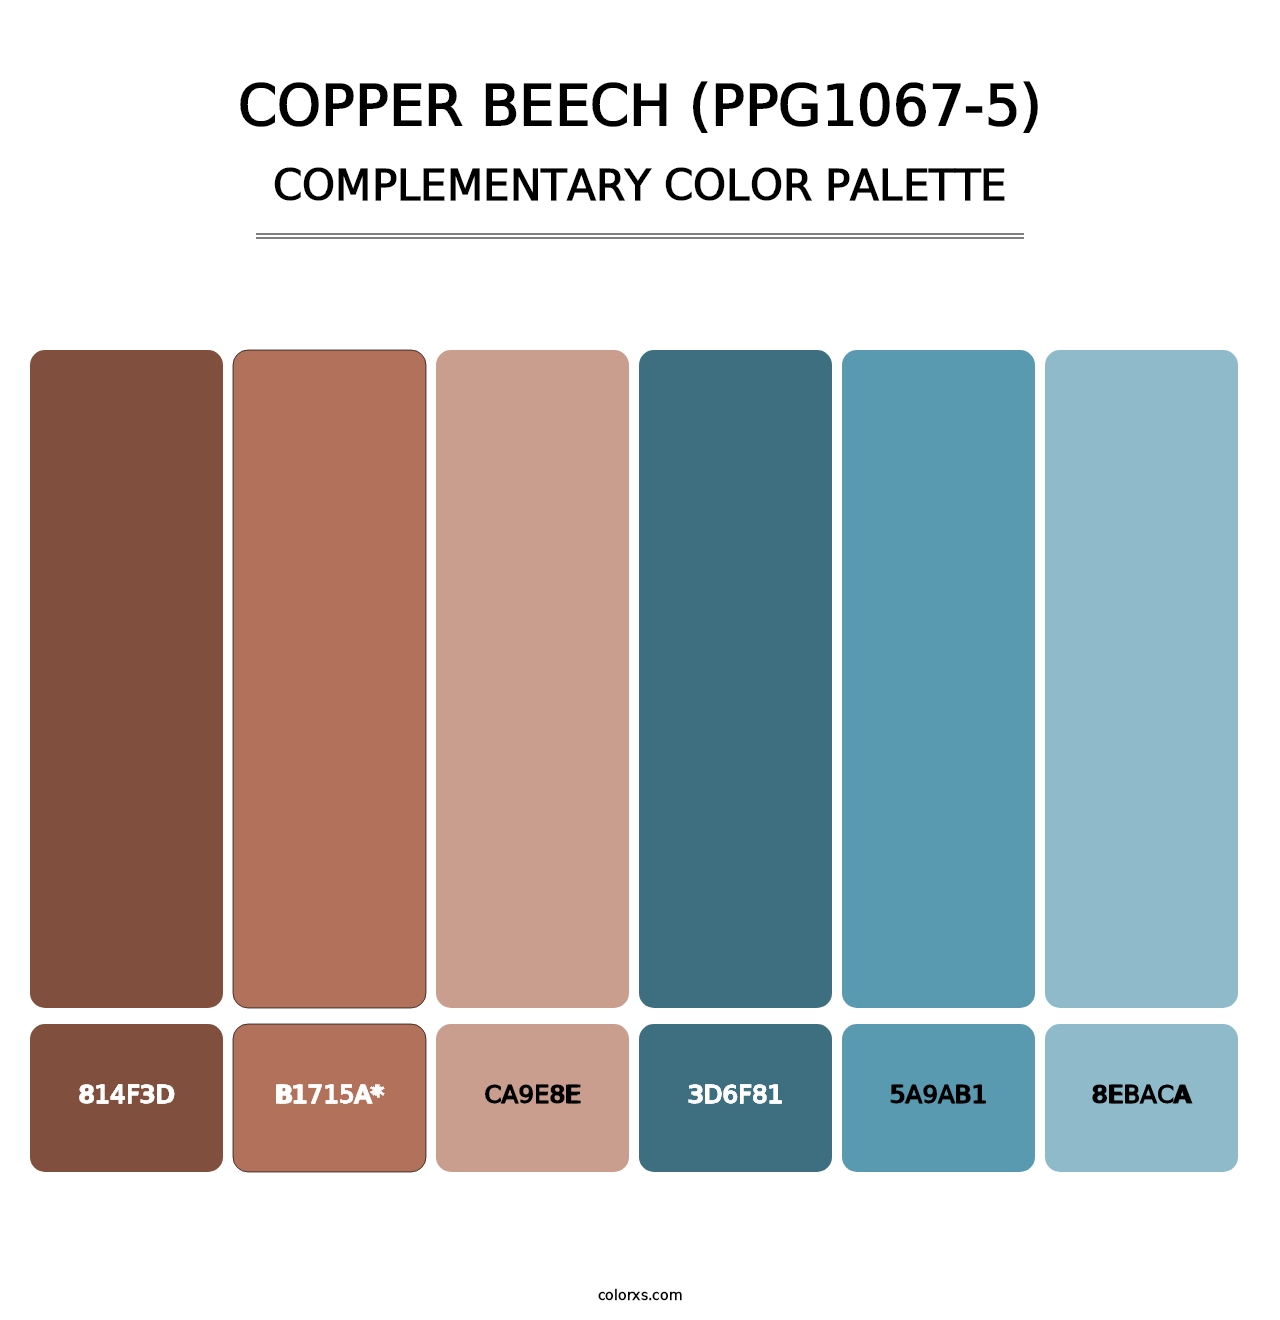 Copper Beech (PPG1067-5) - Complementary Color Palette